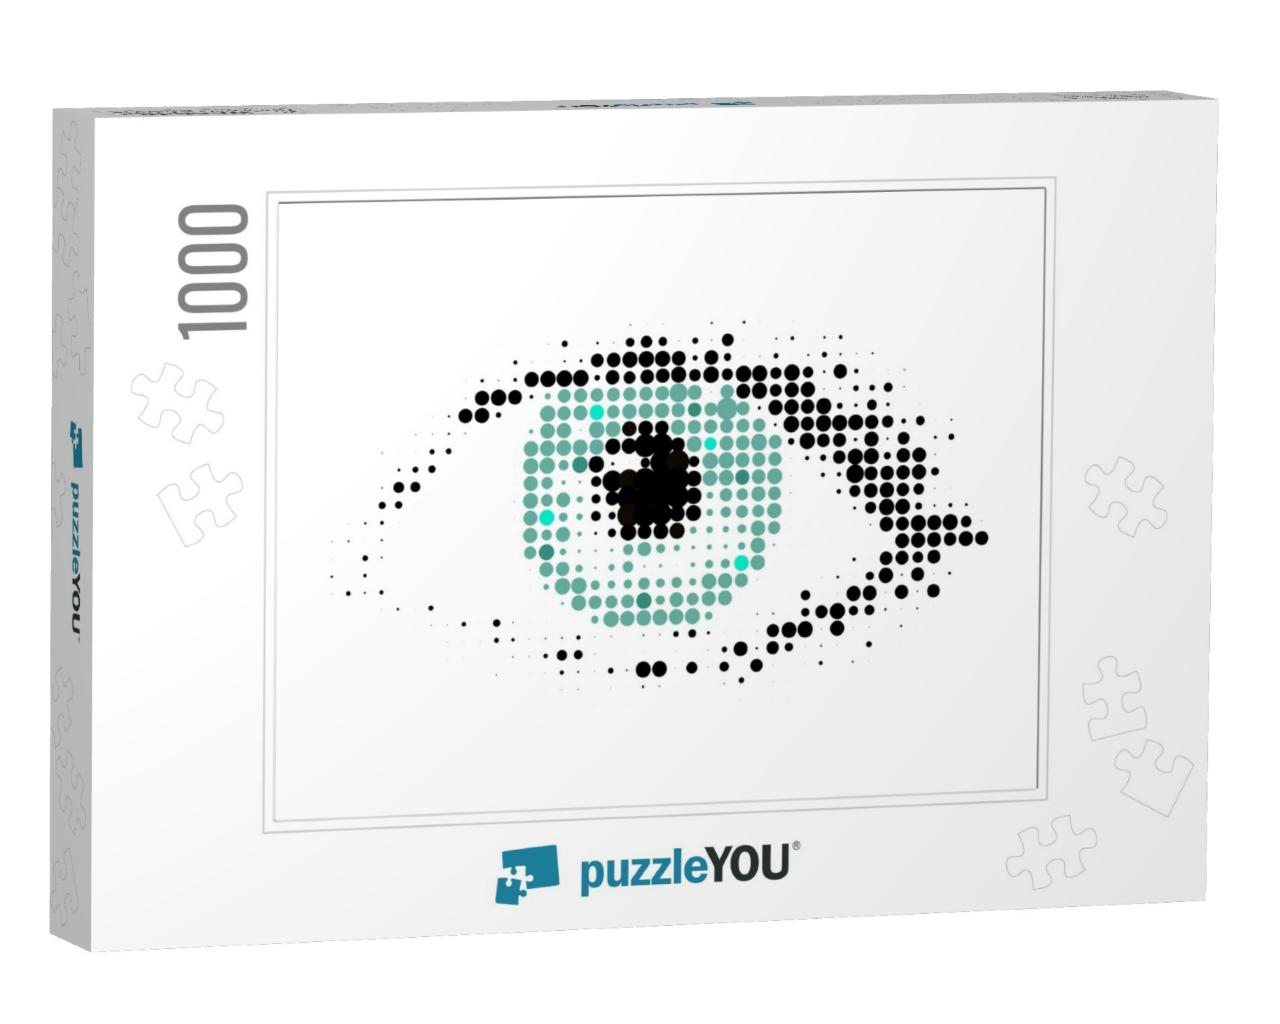 The Human Eye, a Drawing in a Modern Halftone Style. Flat... Jigsaw Puzzle with 1000 pieces